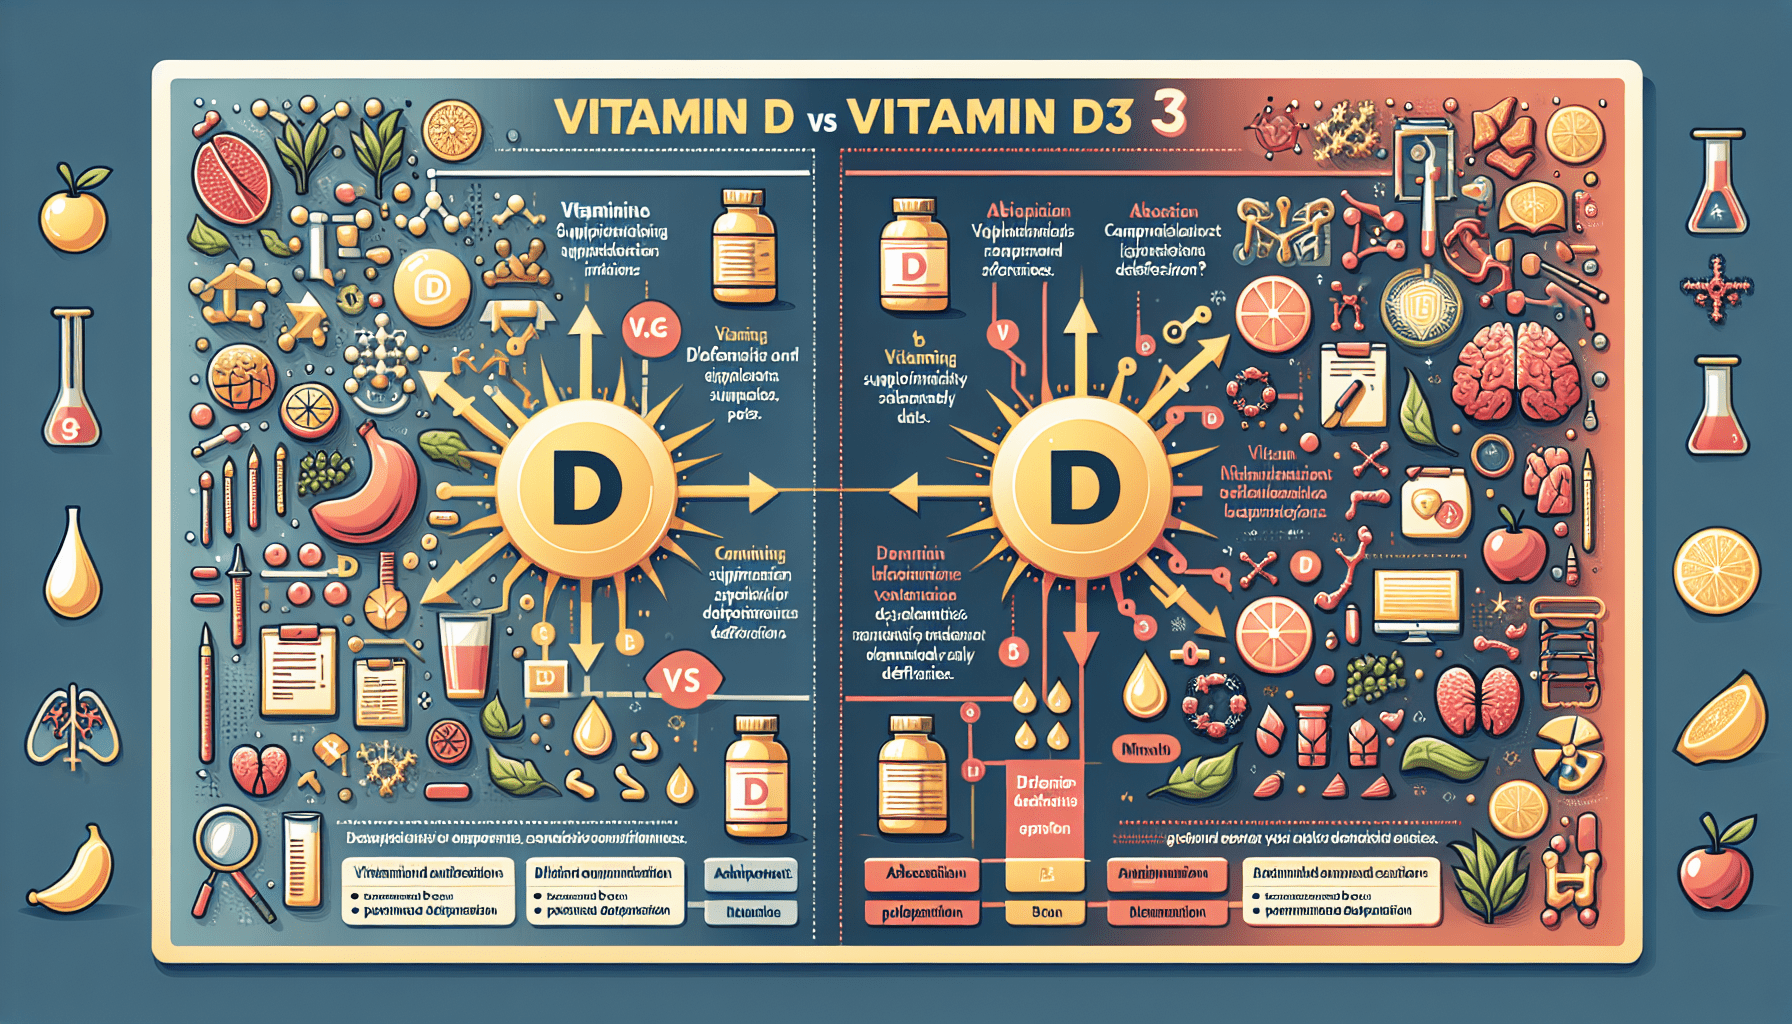 What Is The Difference Between Vitamin D And Vitamin D3?